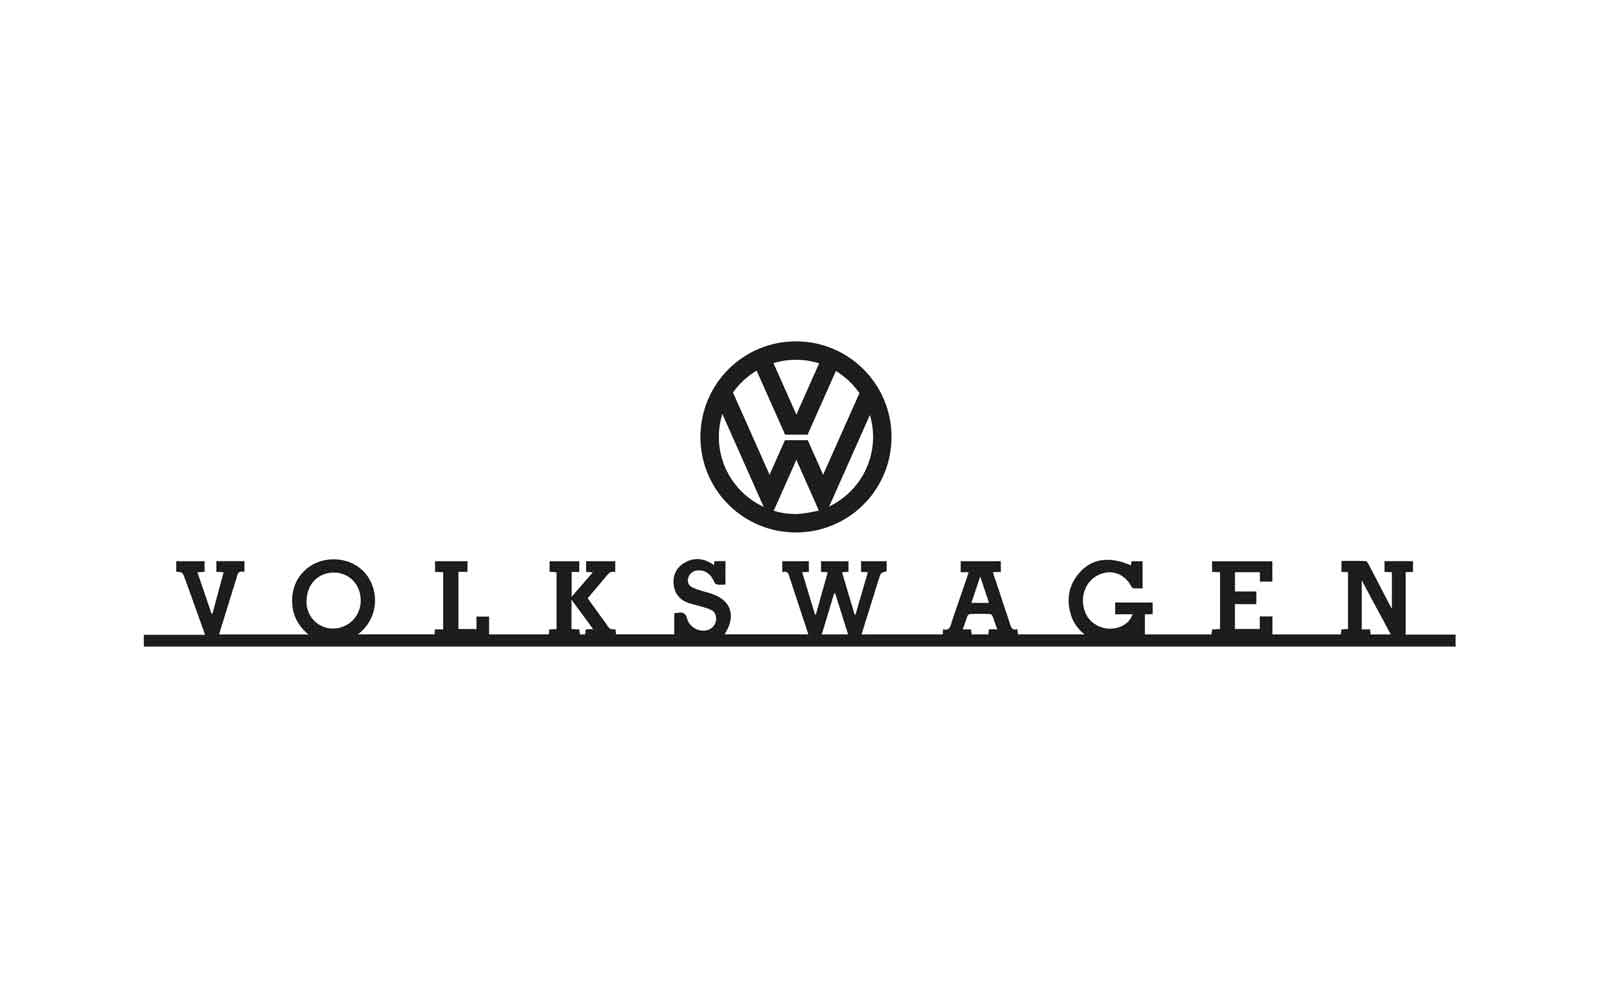 Rustic VW Logo - Volkswagen Archives - Surrey Home and Gifts